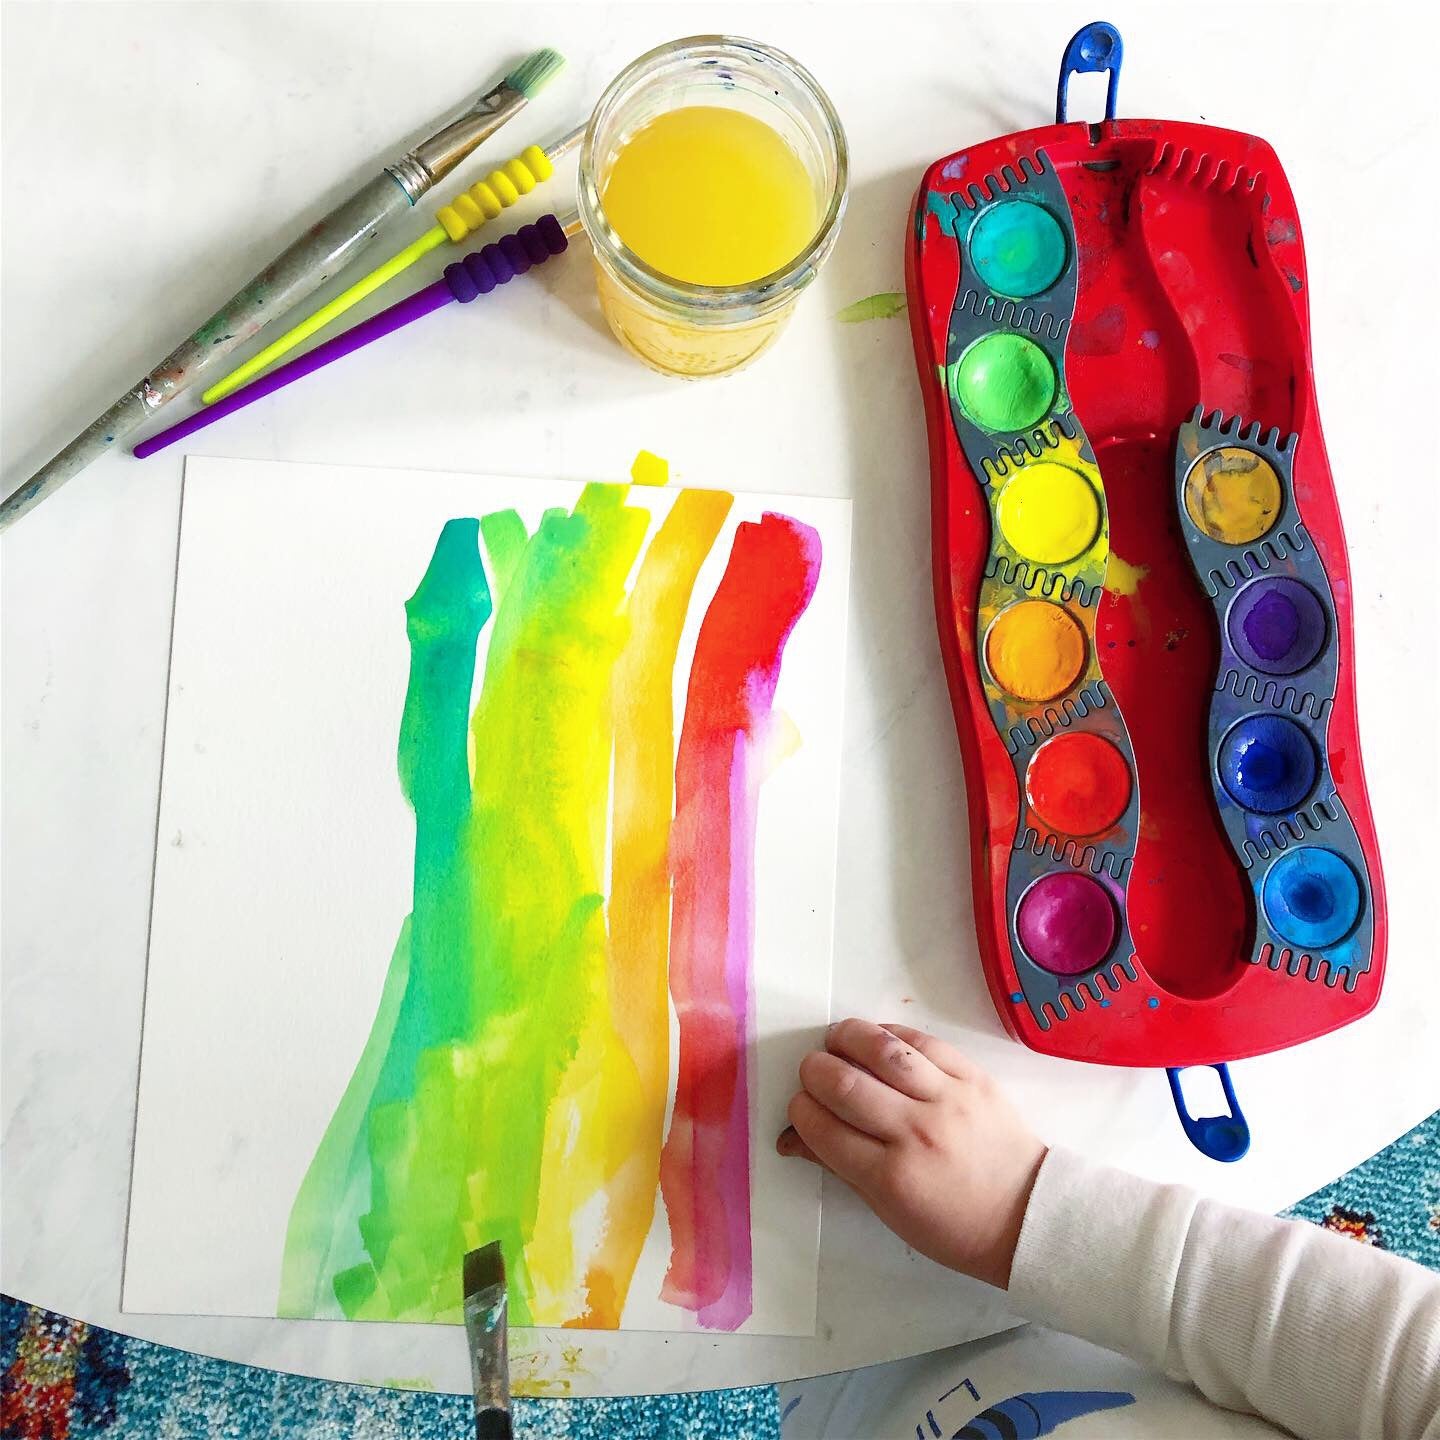 6 Cool Art Supplies & What to Do With Them - 9Mousai